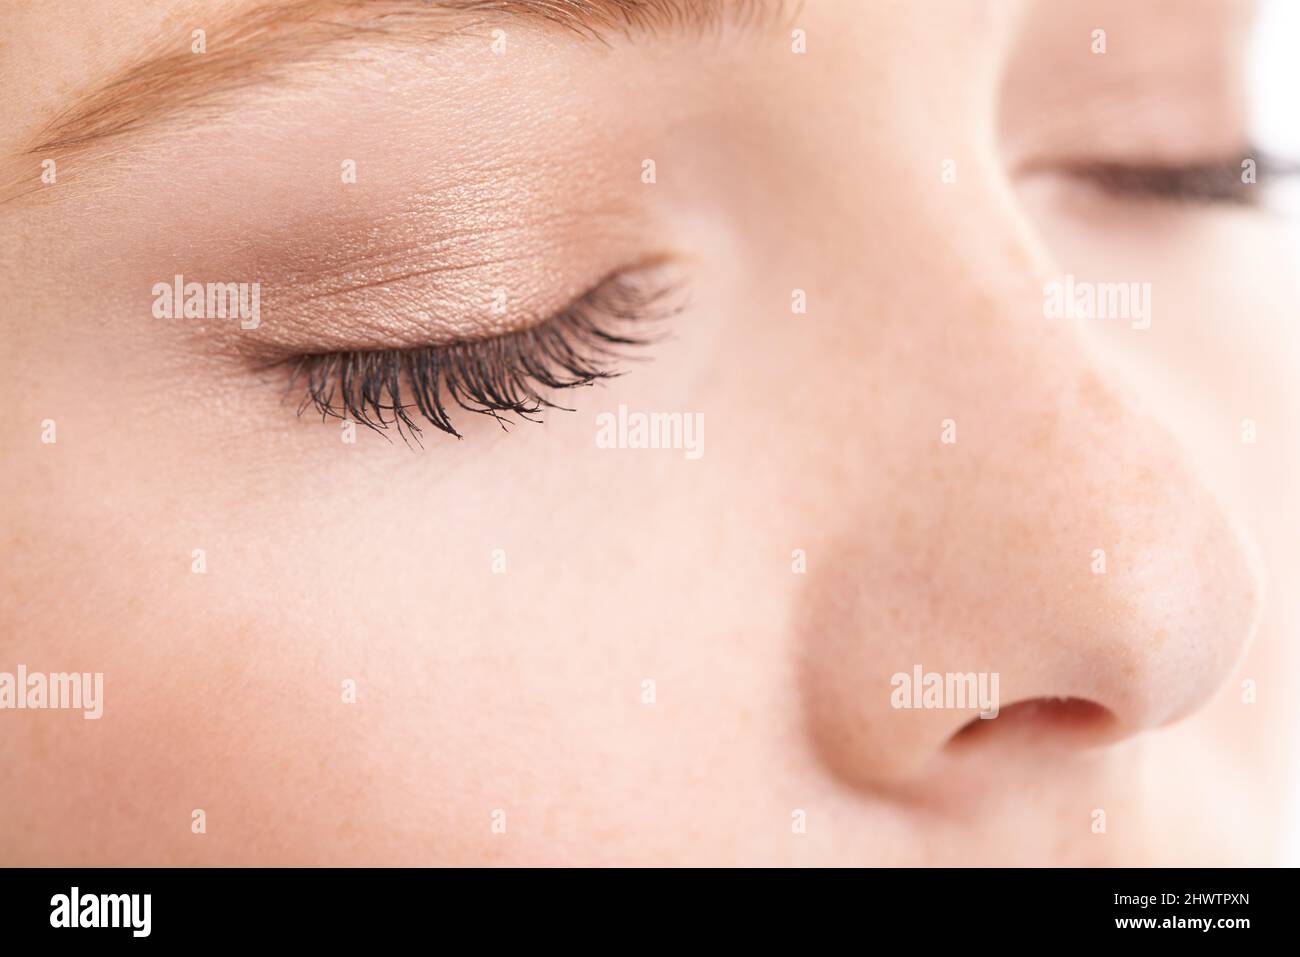 She likes to keep her make-up natural. Closeup studio shot of a model with her eyes closed. Stock Photo